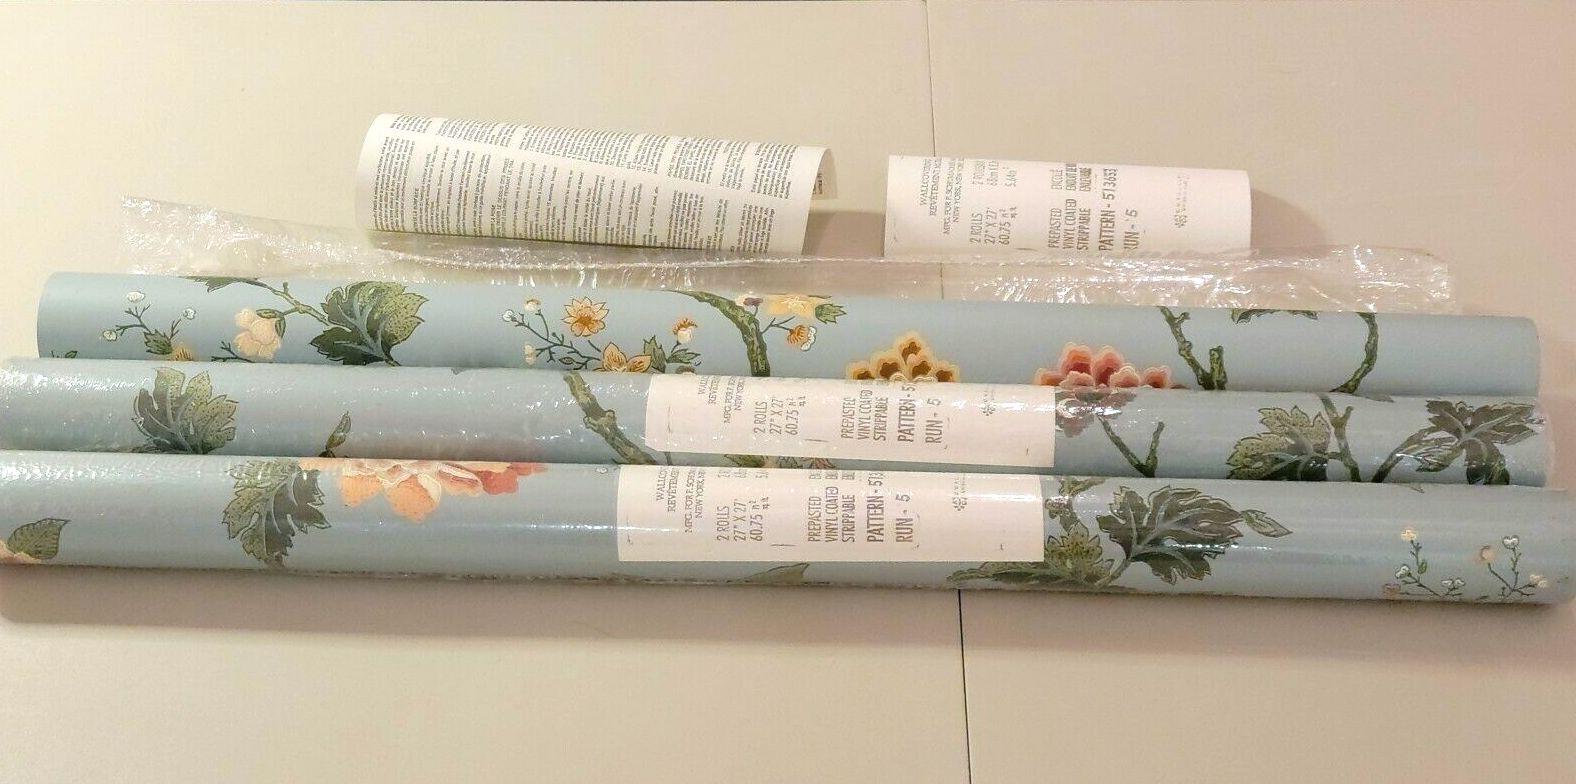 Schumacher & Co Blue Jacobean floral hand-printed wallpaper, Pattern 513653, R.5. 3 double rolls. Each roll is 60.75 square feet (27